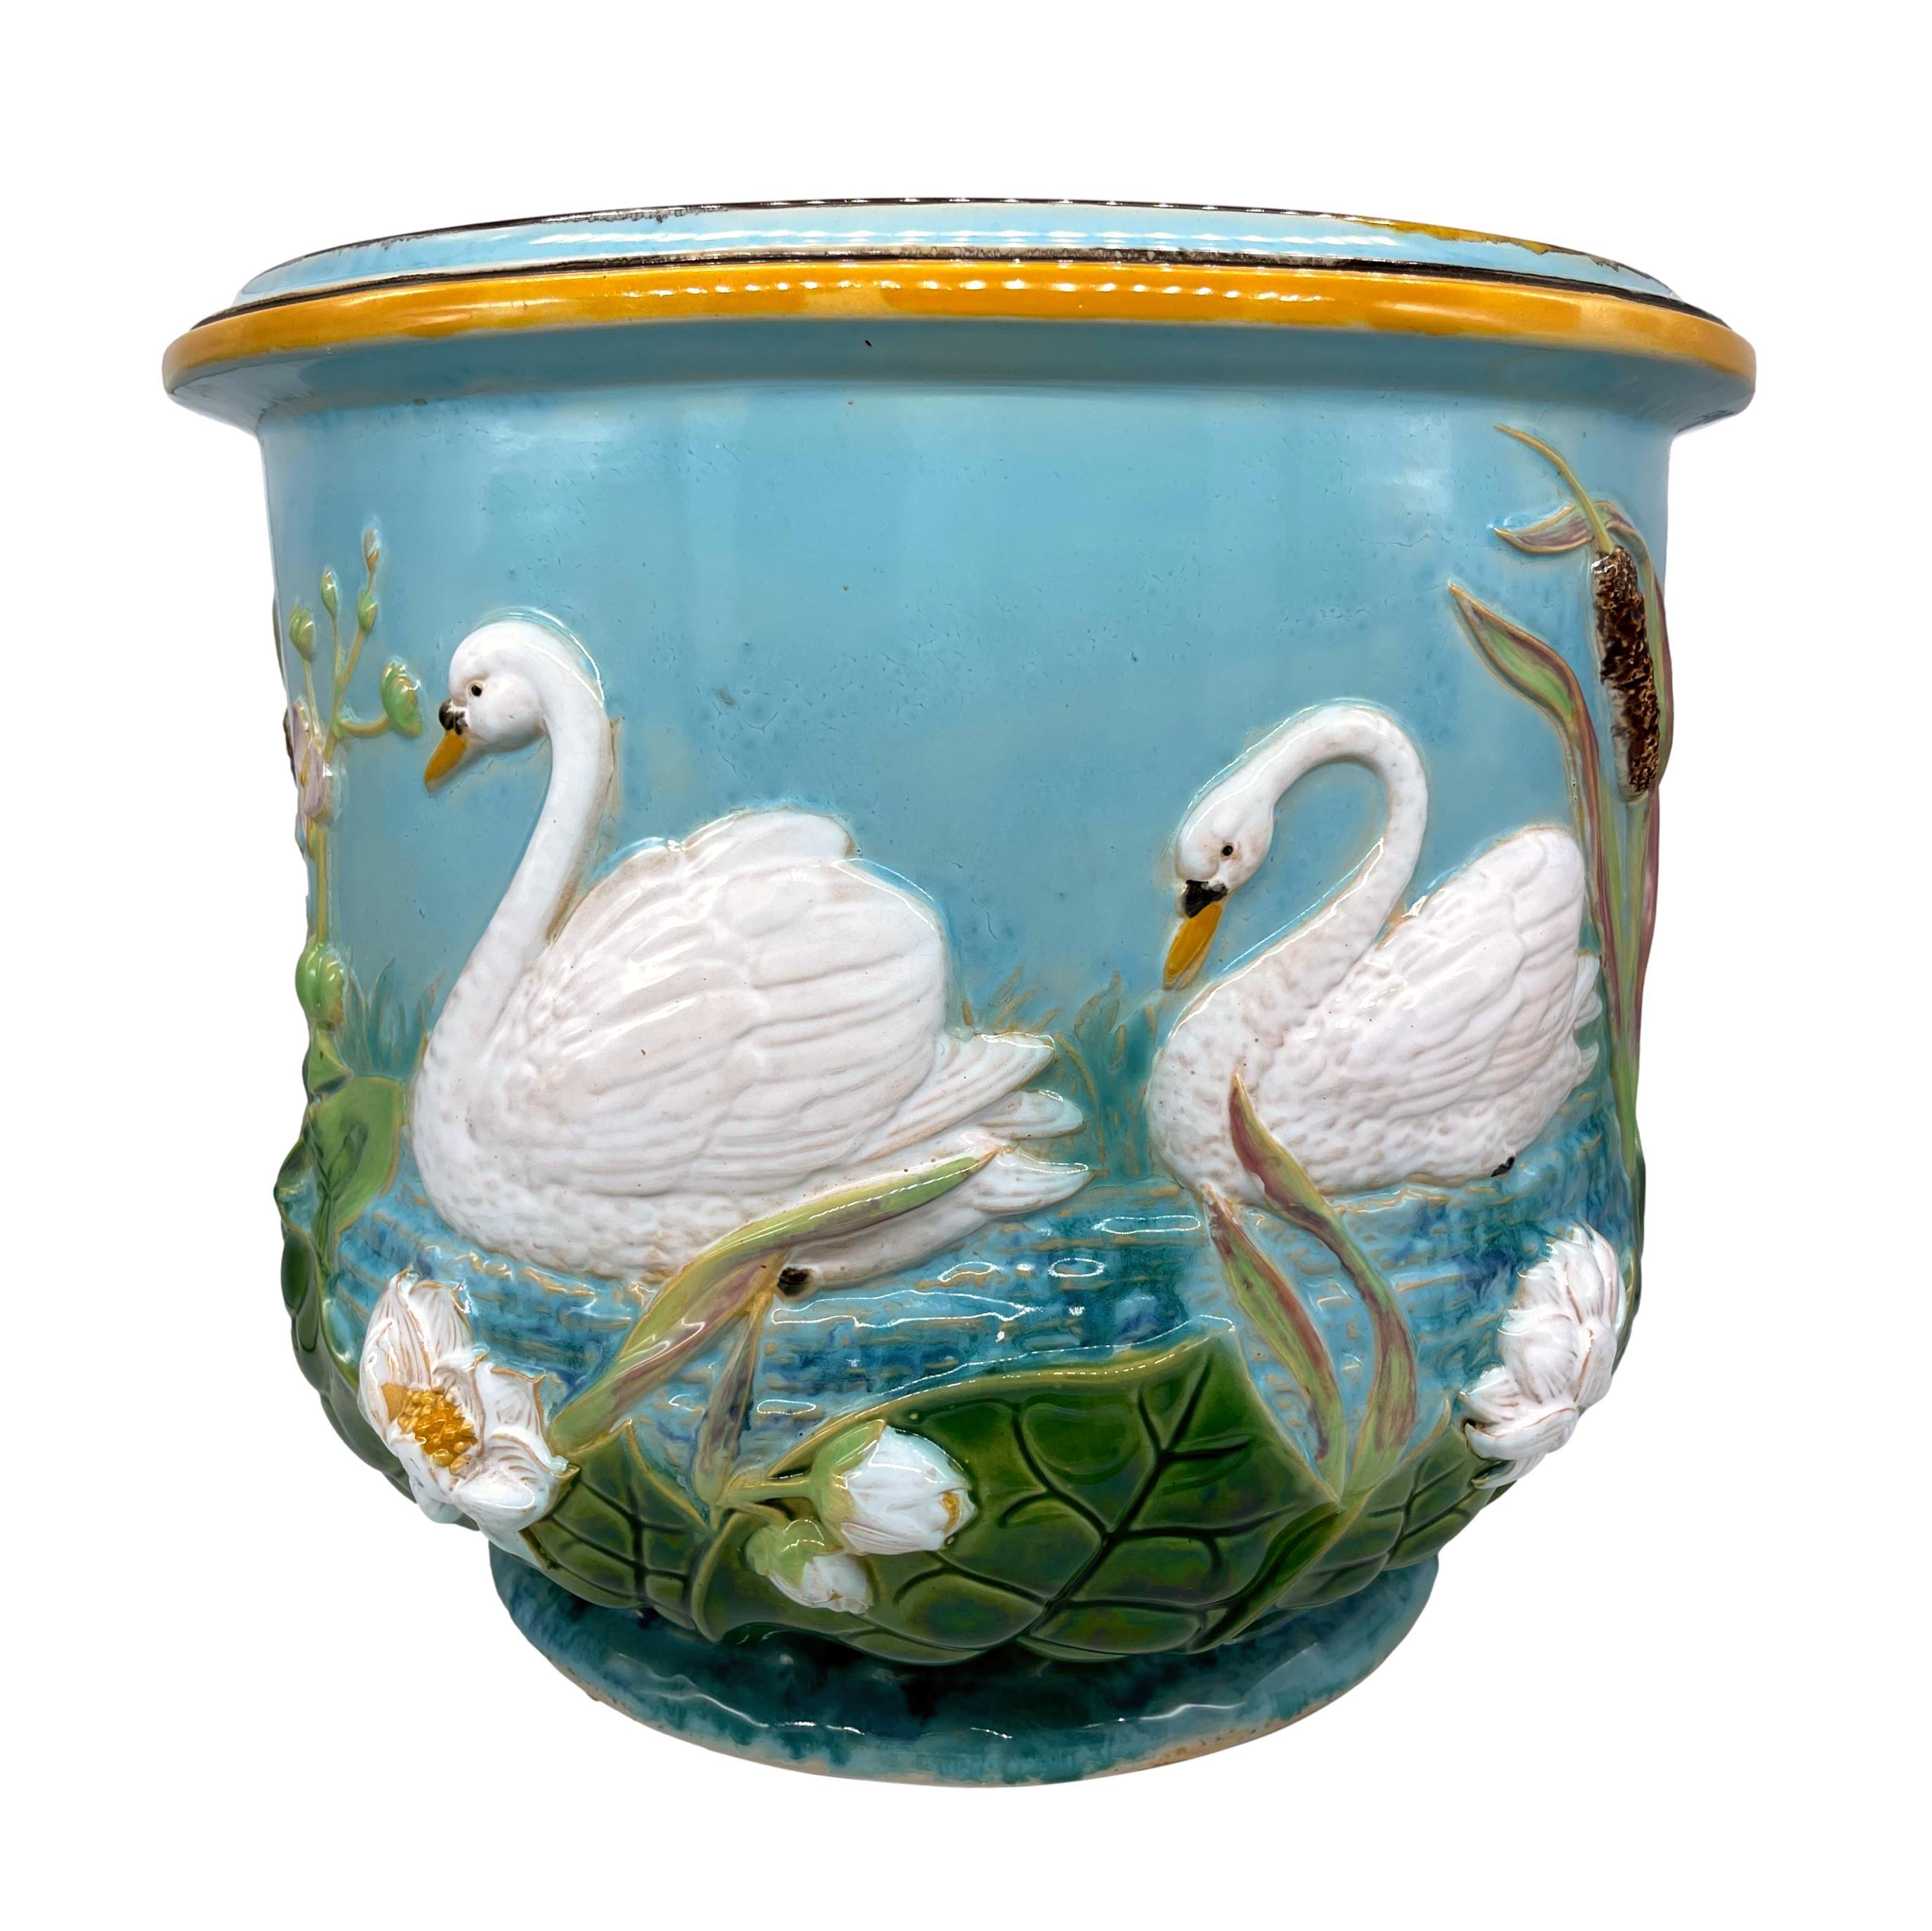 George Jones majolica jardinière, the cylindrical body with relief-molded white swans, waterlilies, pads, and cattails on simulated water with reeds to the background, on a turquoise ground, the interior glazed in lilac, the reverse with